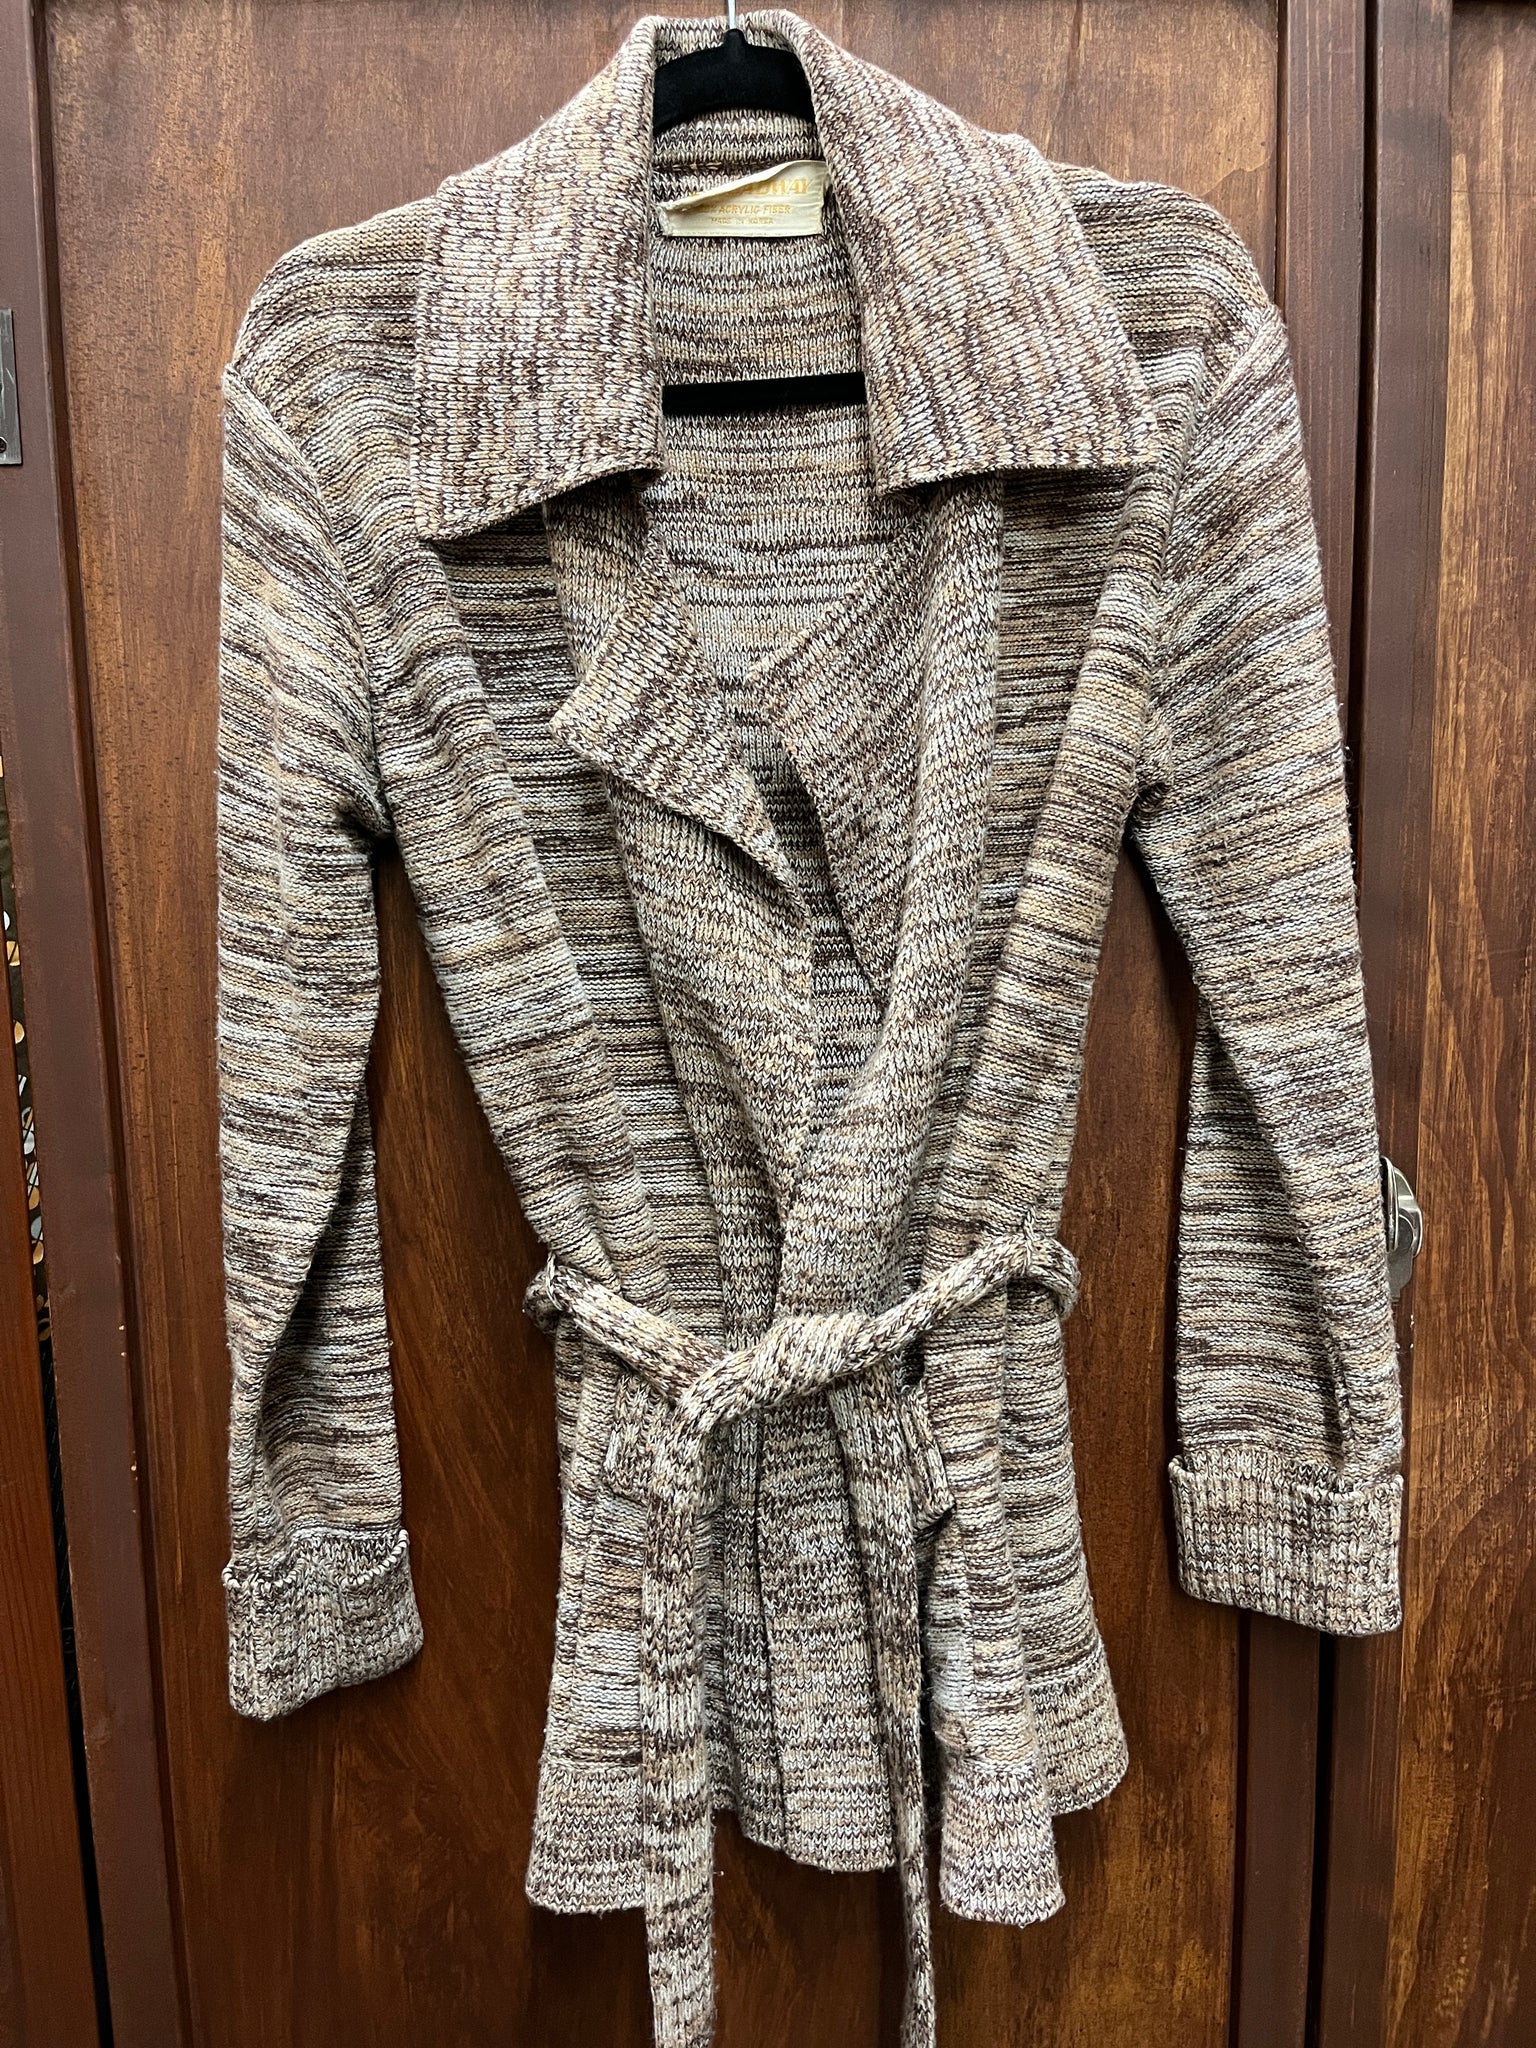 1970s SWEATER- Brown-y belted cardigan